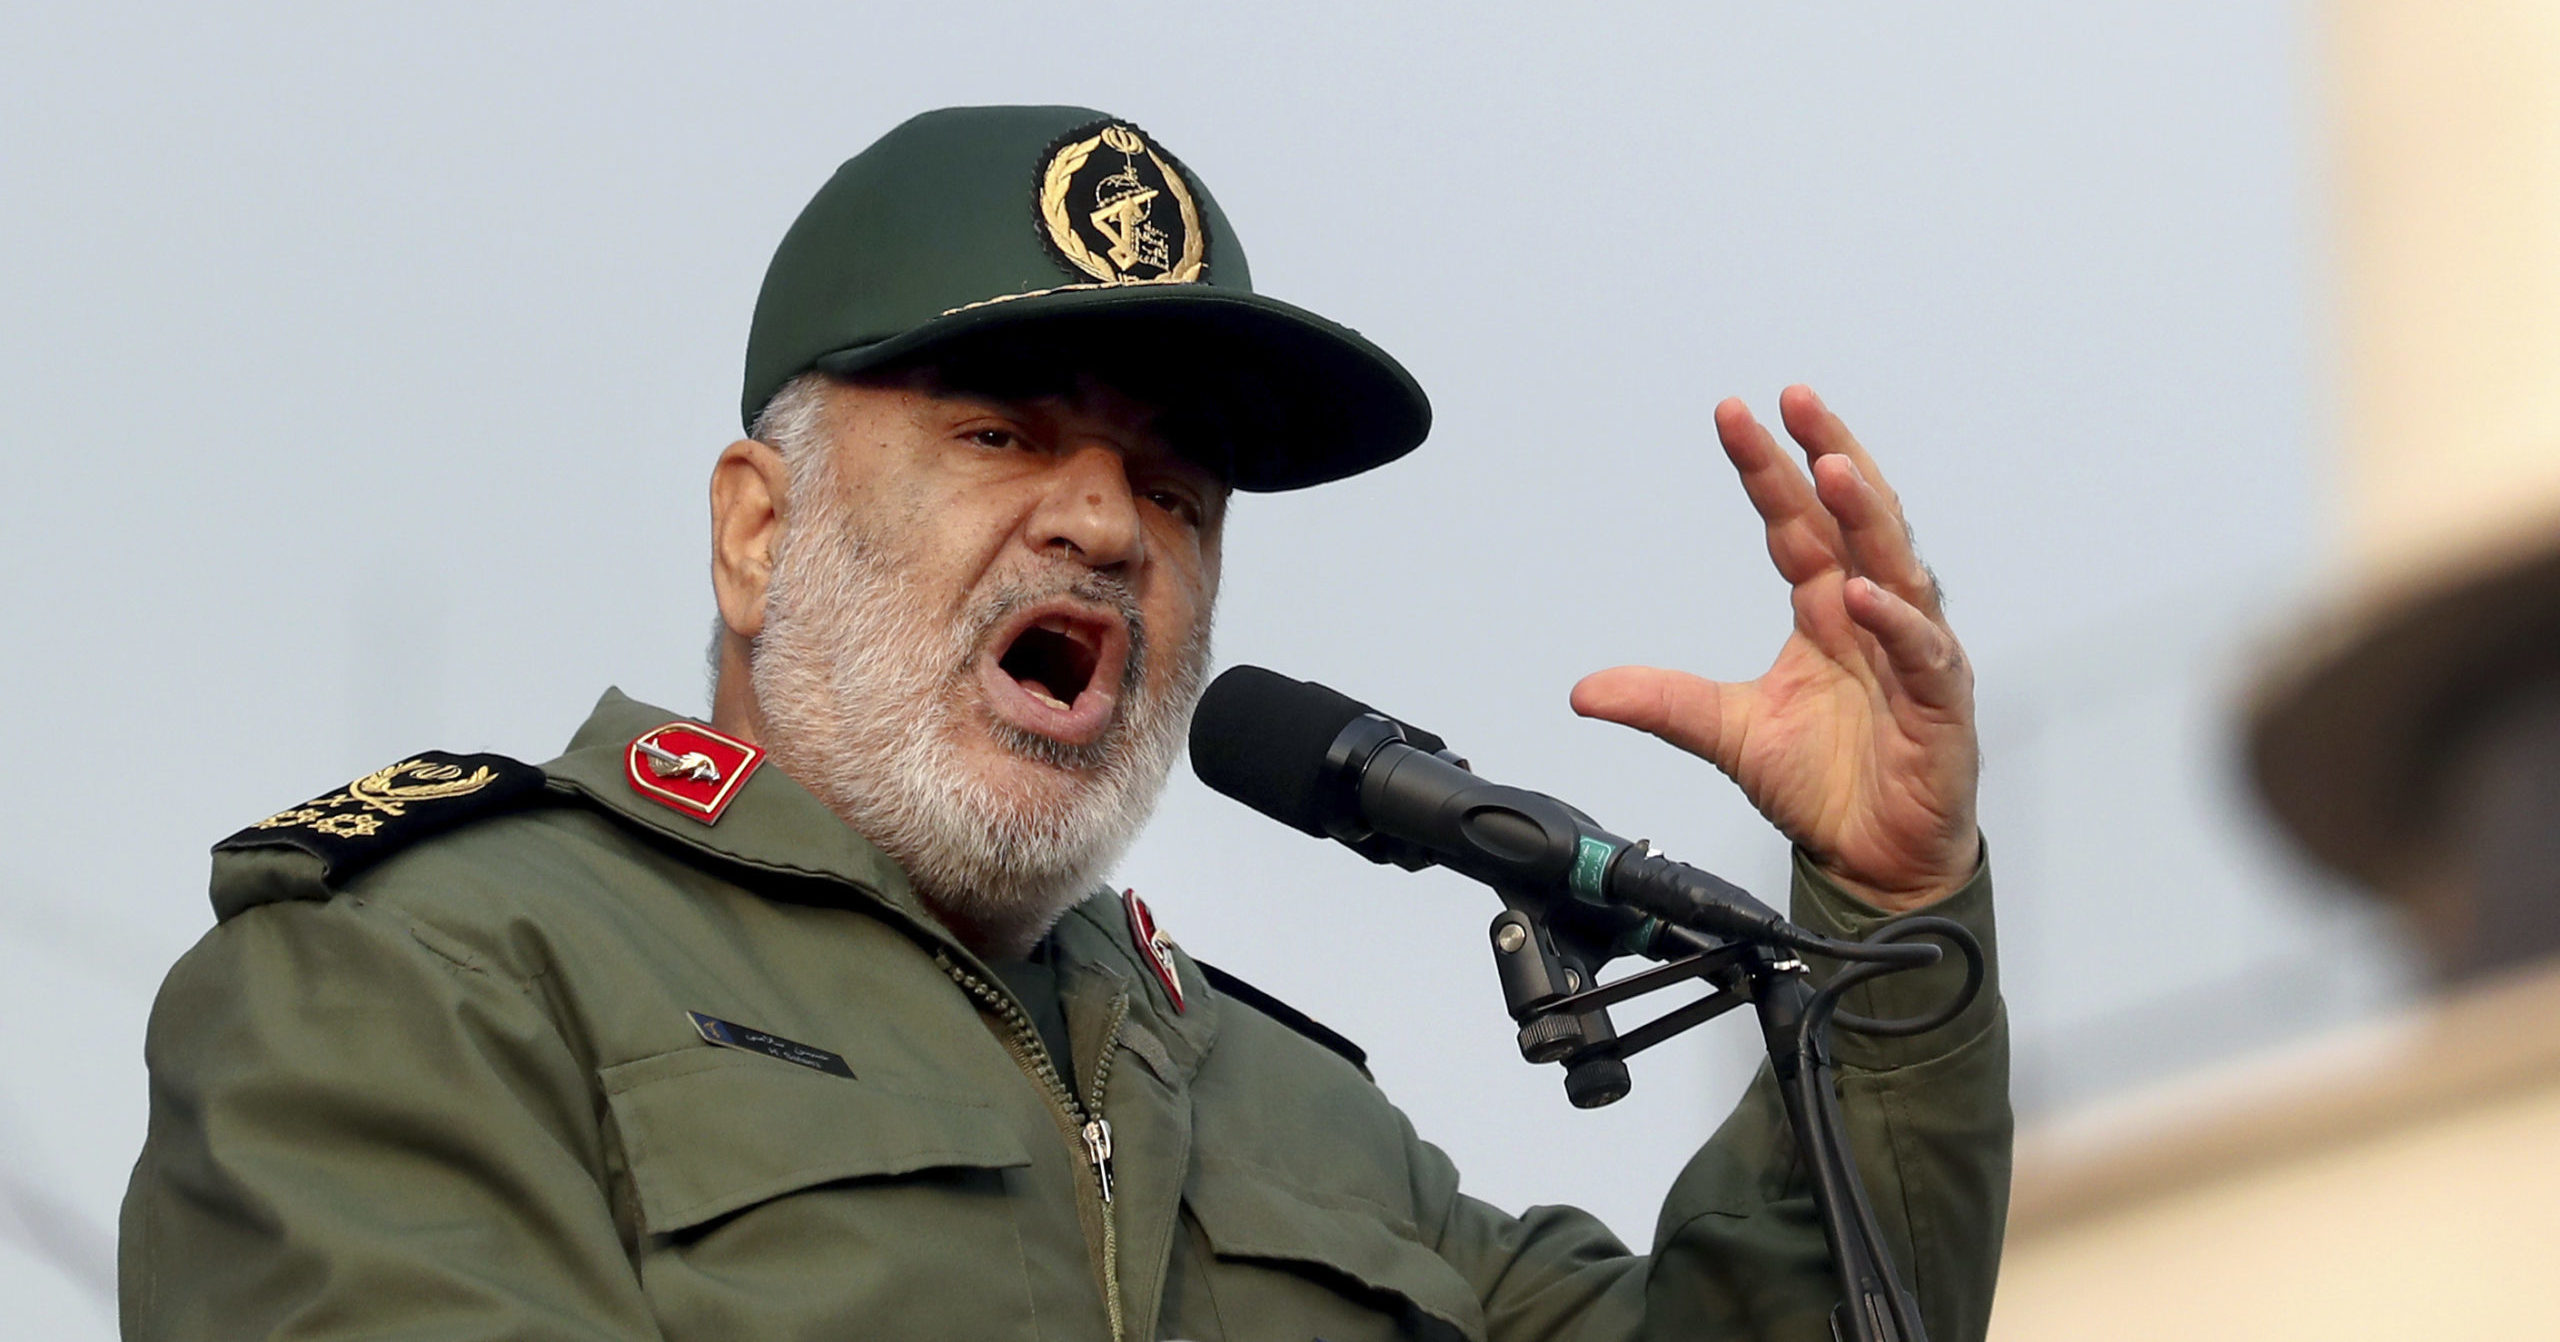 In this Nov. 25, 2019, file photo, Iranian Gen. Hossein Salami speaks at a pro-government rally in Tehran, Iran. The chief of Iran’s paramilitary Revolutionary Guard has threatened to go after everyone who had a role in a top general’s January killing during a US drone strike in Iraq. US President Donald Trump warned this week that Washington would respond harshly to any Iranian attempts to take revenge for the death of Gen. Qassem Soleimani.